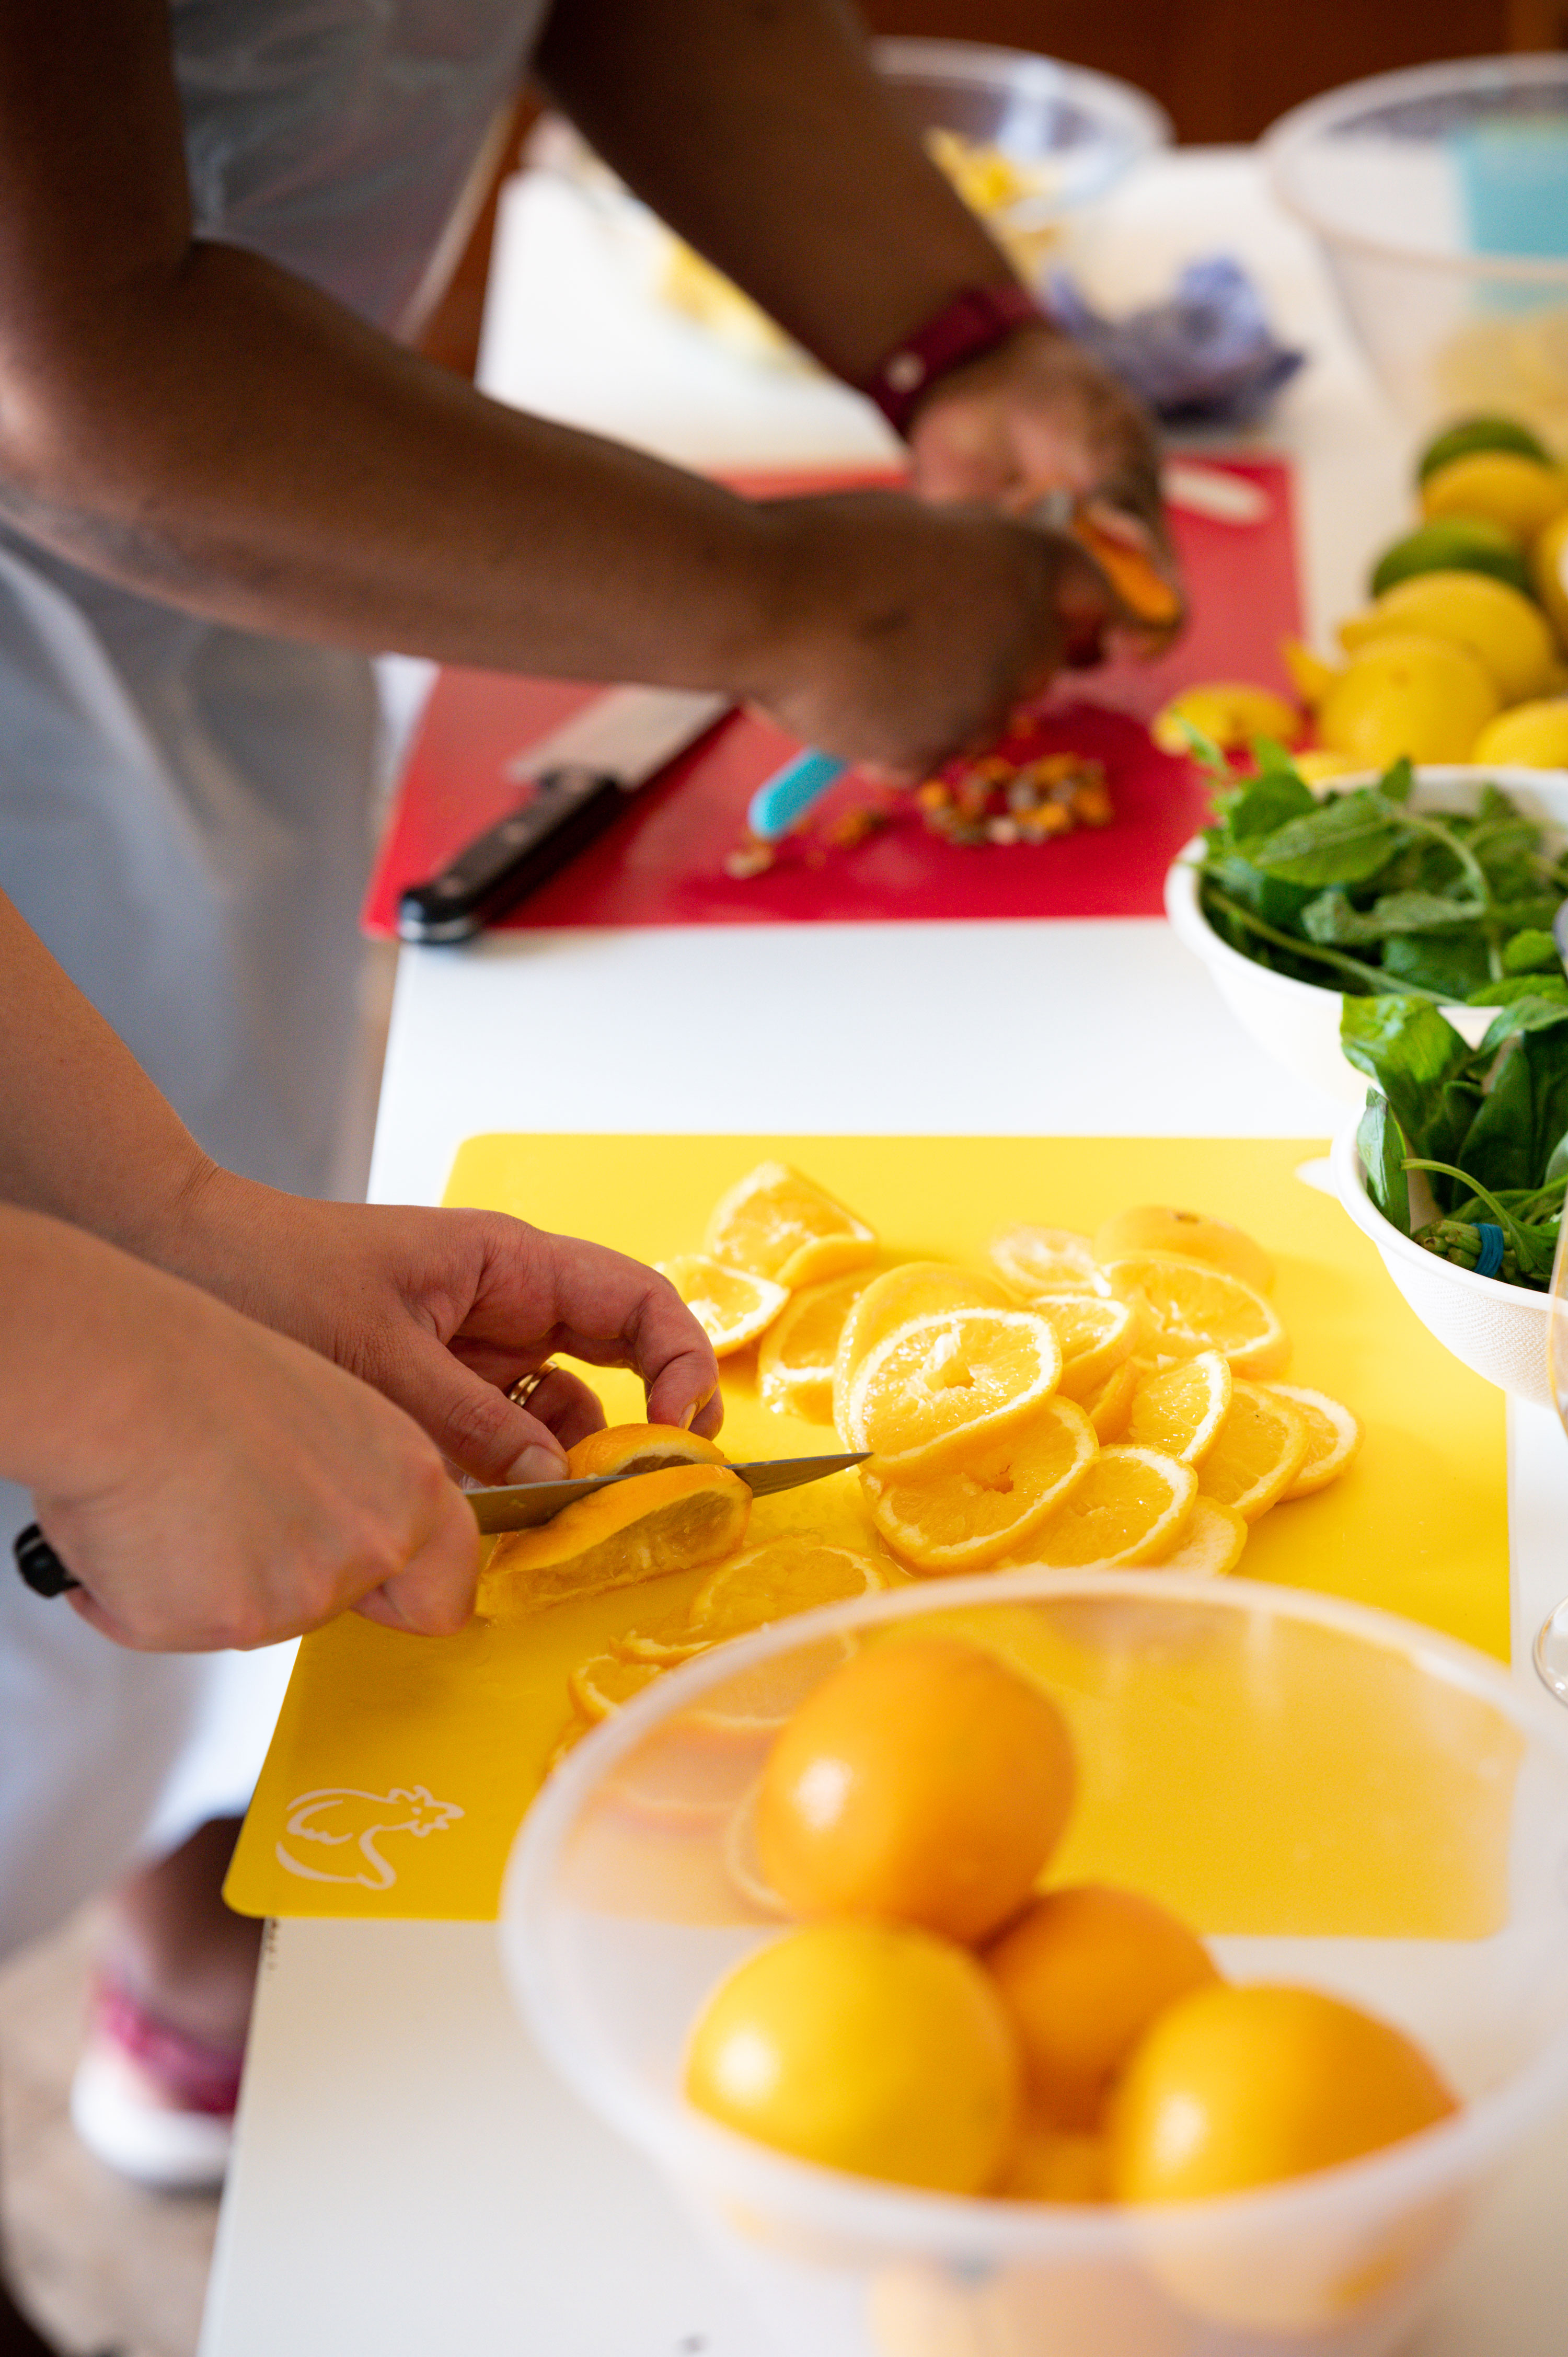 Two people using a knife to cut oranges into slices